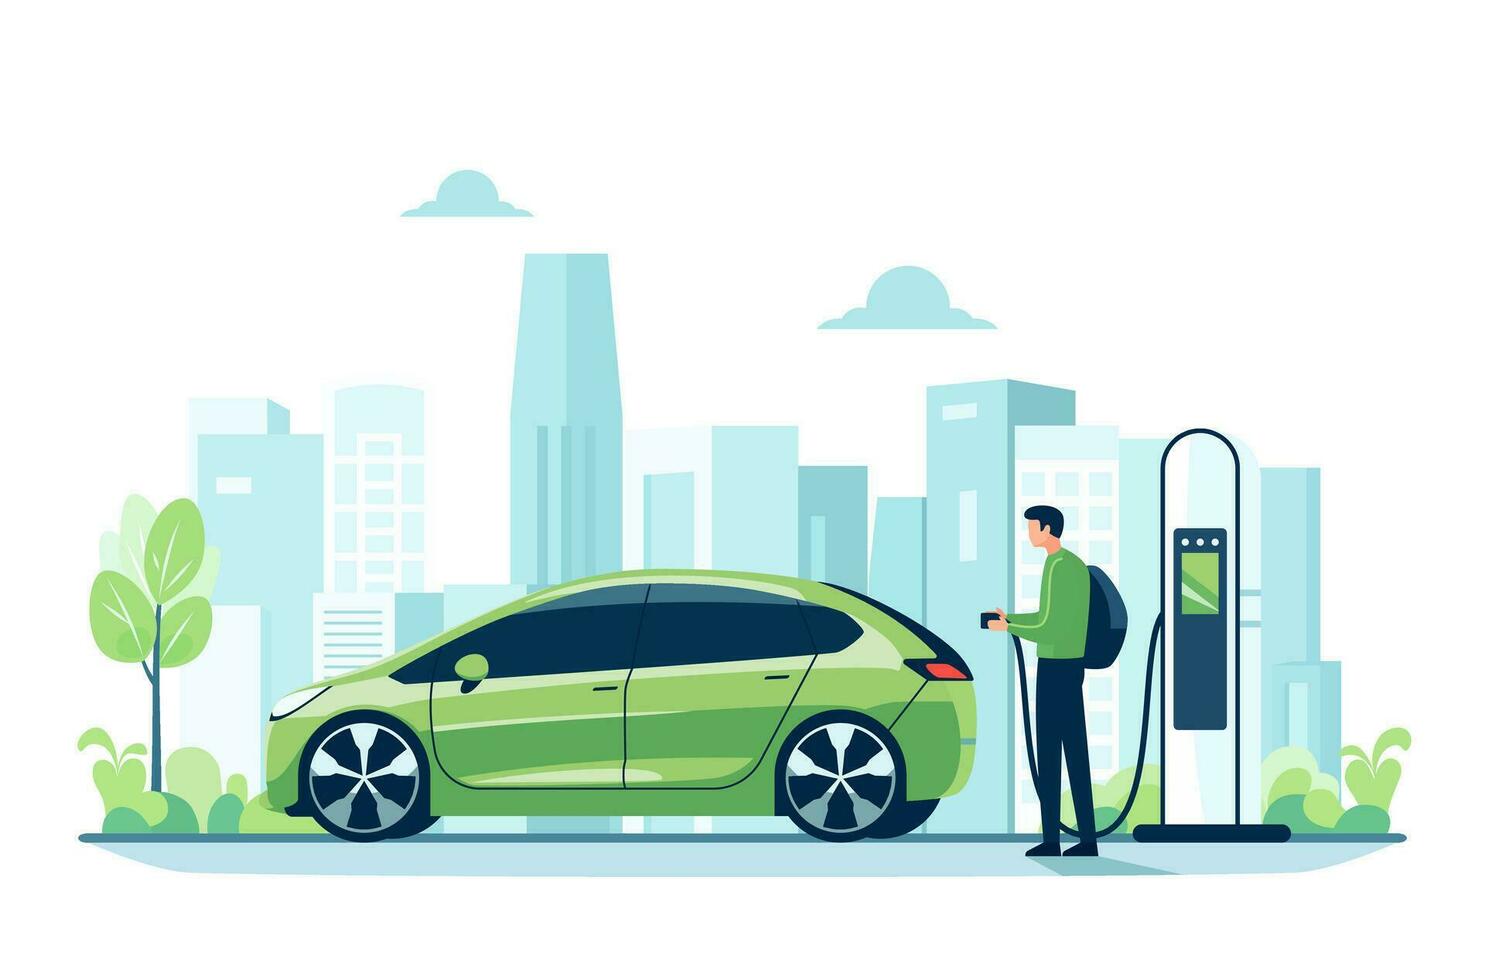 Futuristic Electric Vehicle, Electric Car Charging Station, Environmentally Friendly Transportation, Save the Earth Concept, Flat Style Vector Illustration.